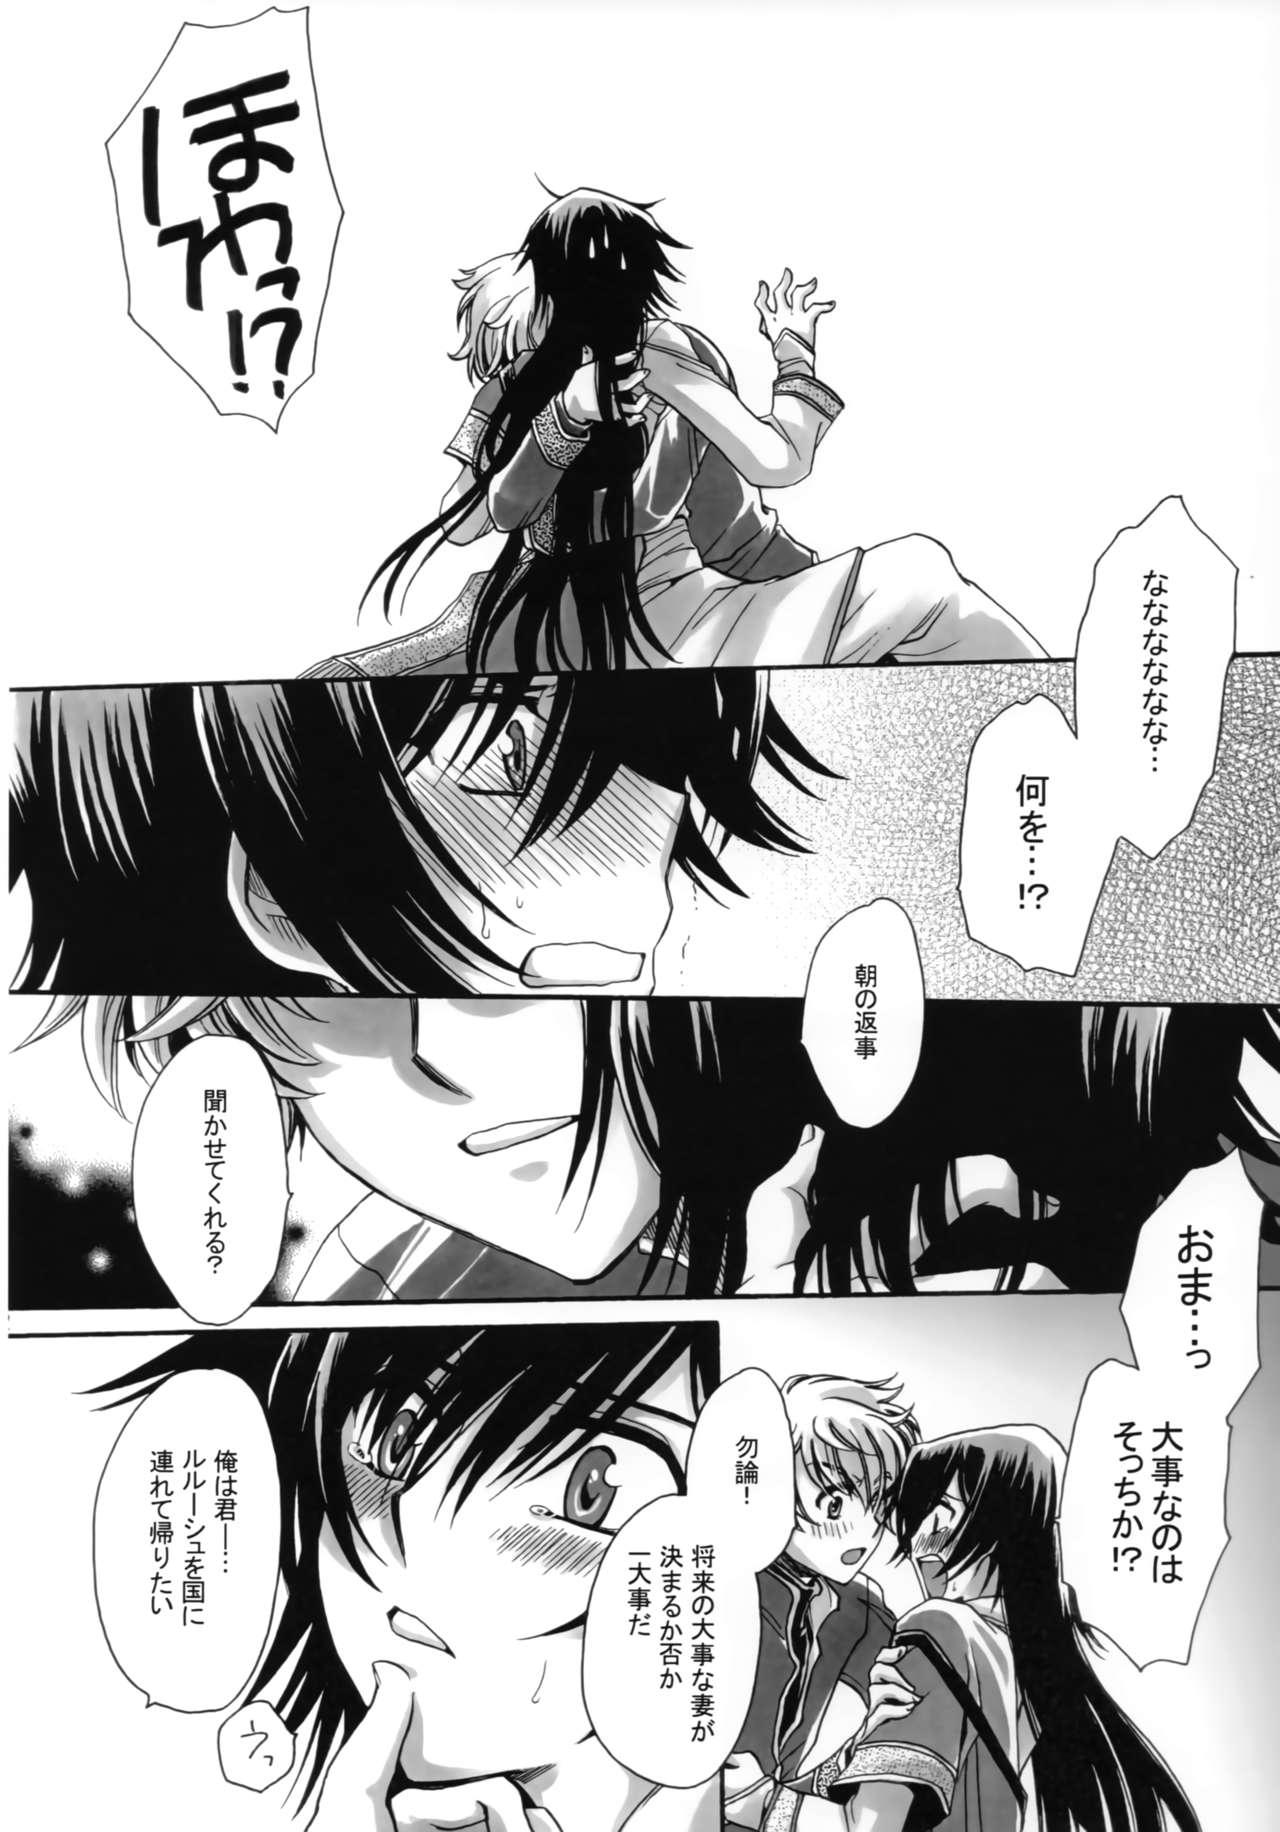 Sapphic a lot of Princesses - Code geass Stroking - Page 11